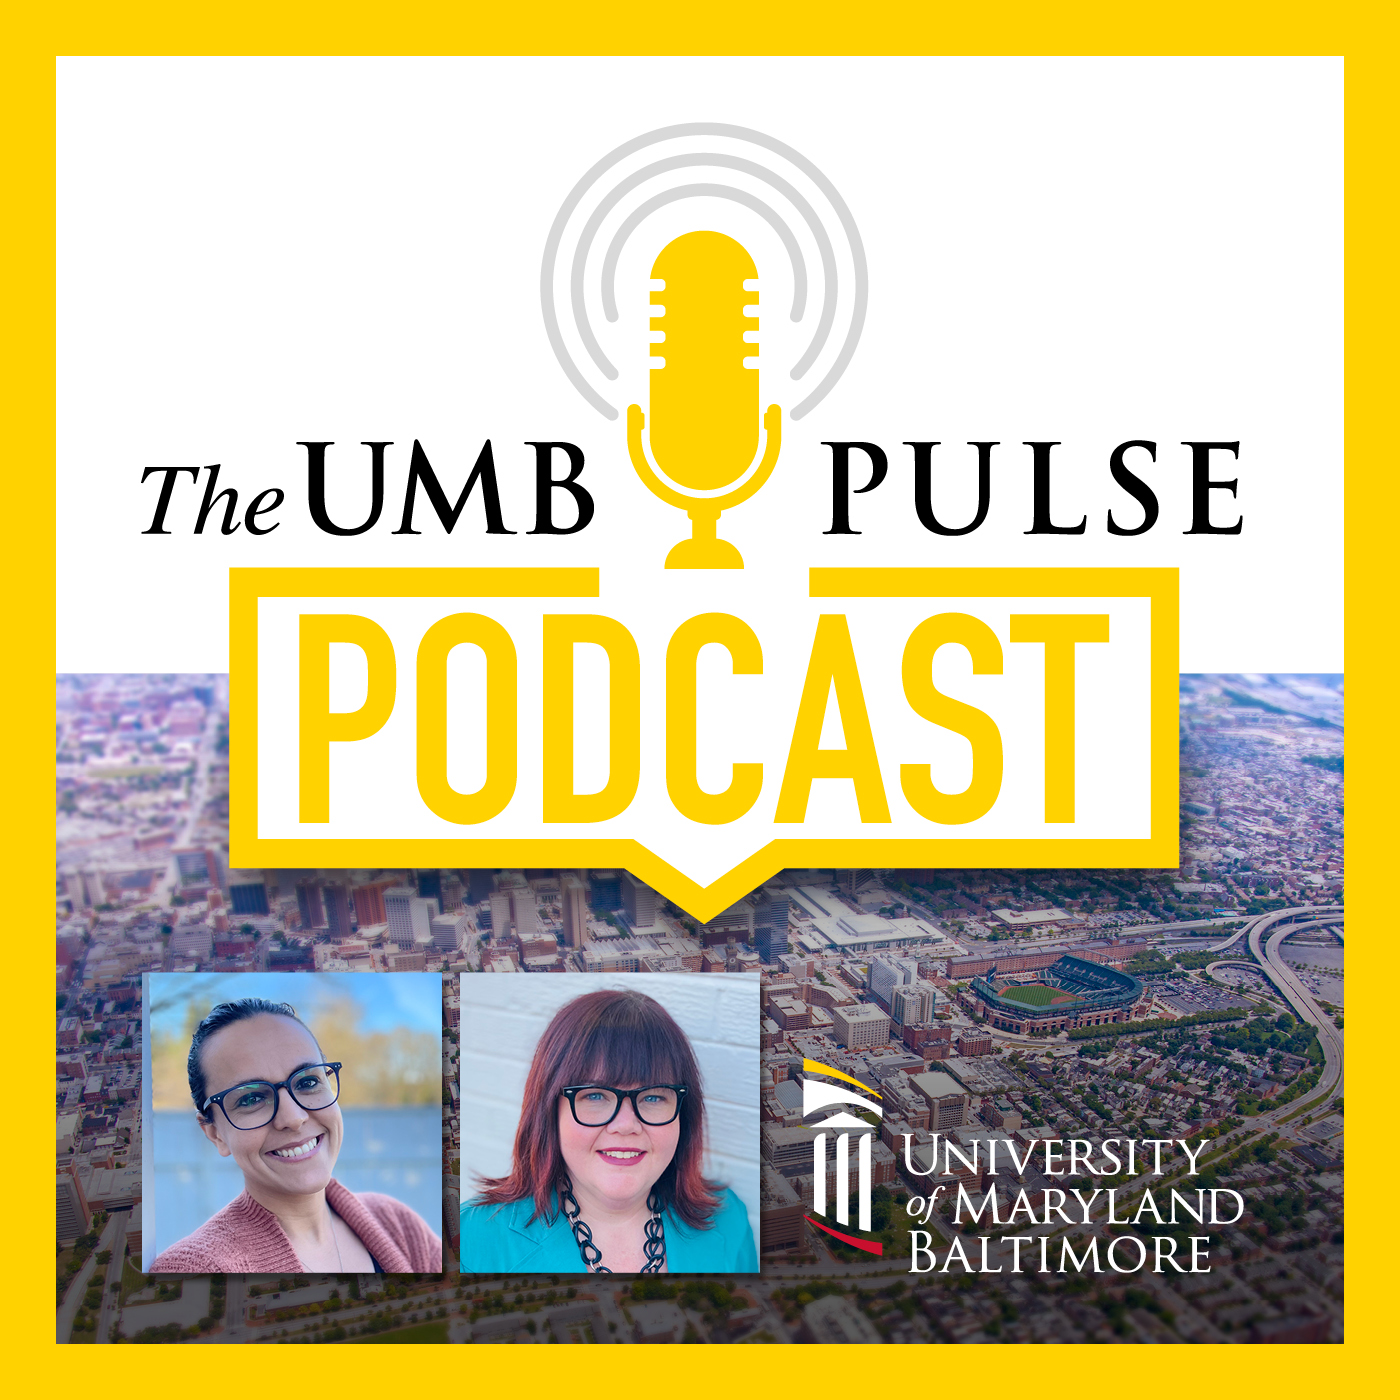 UMB Pulse Podcast with photos of Marlene Matarese and Angela Weeks